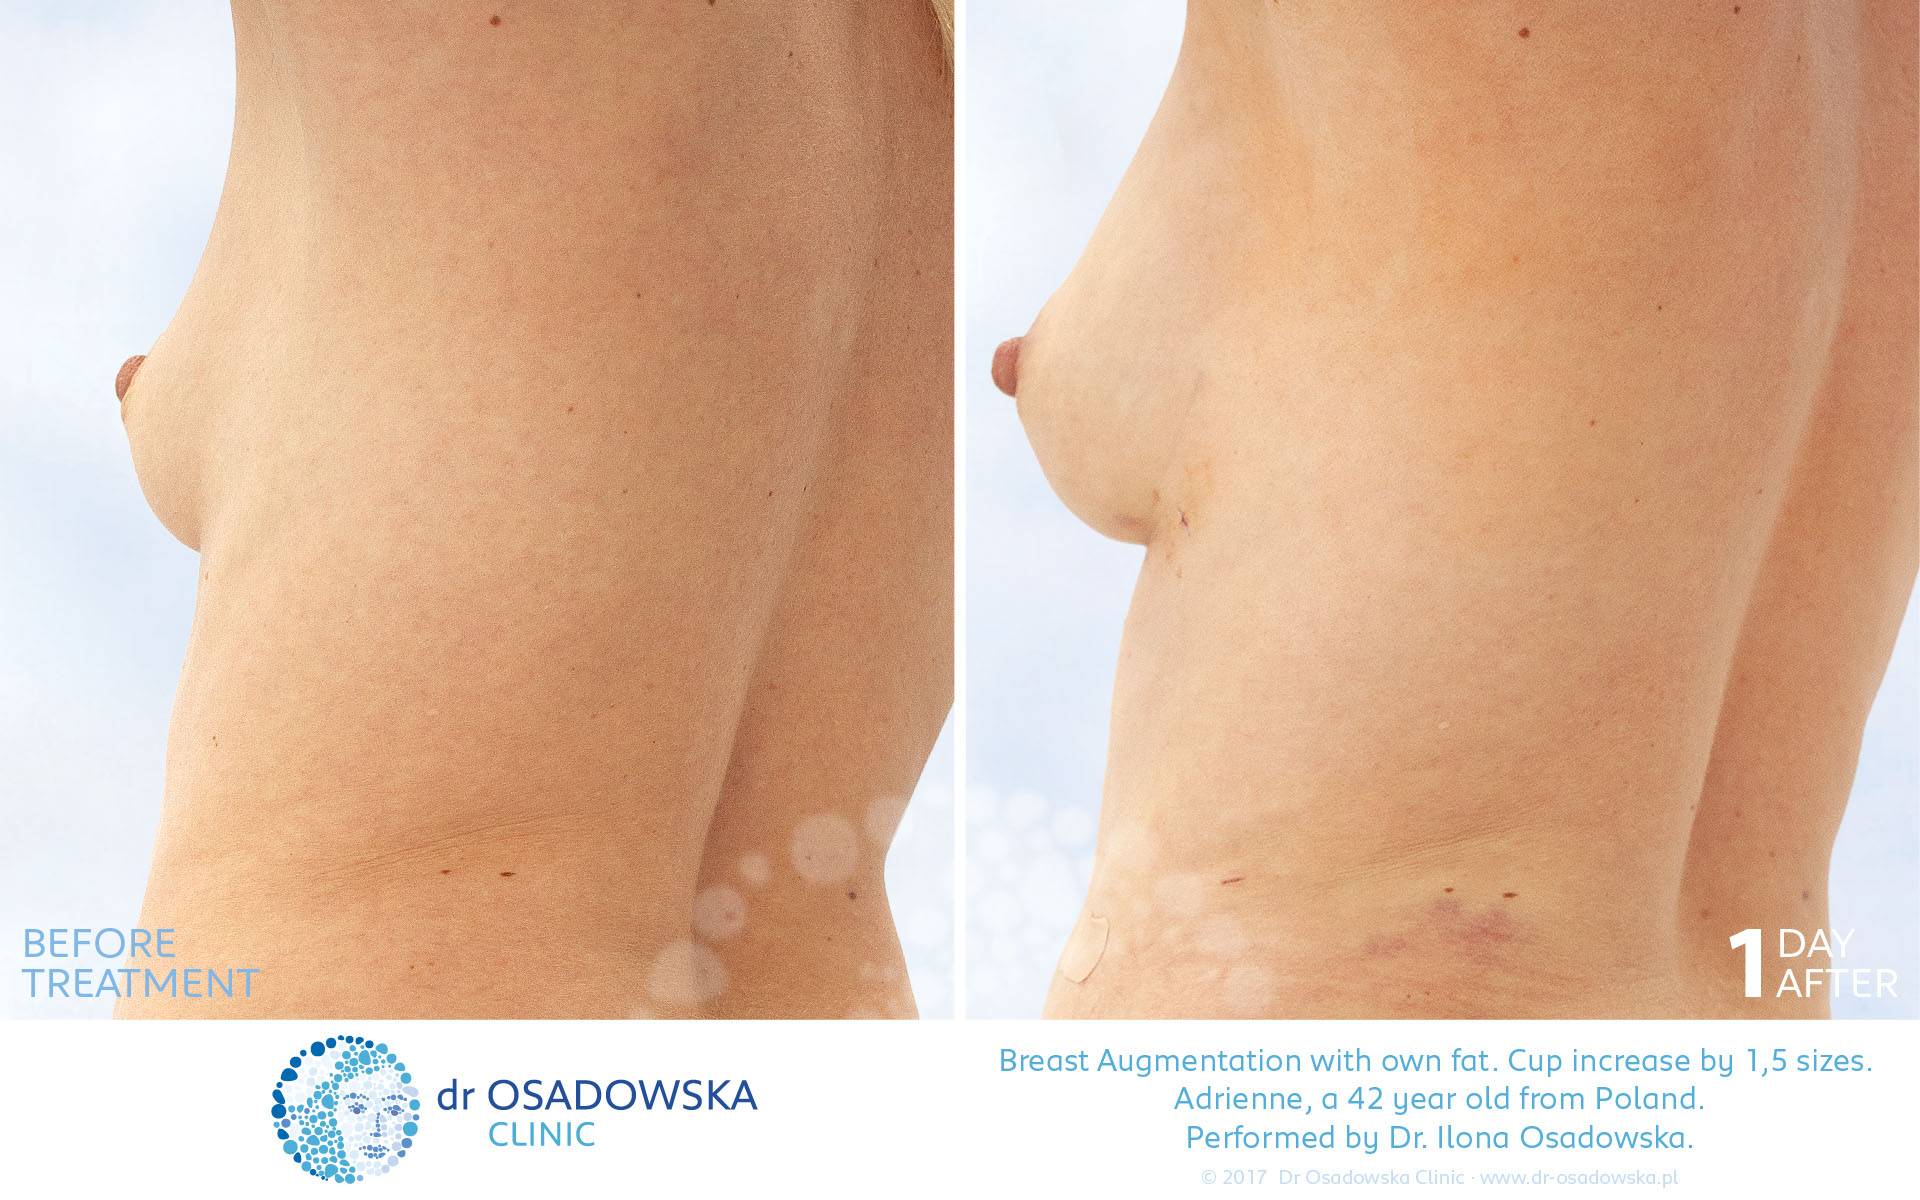 Breast augmentation with own fat - pictures before and one day after surgery. Laser liposuction LipoLife. Adrienne, a 42 year old from Poland.